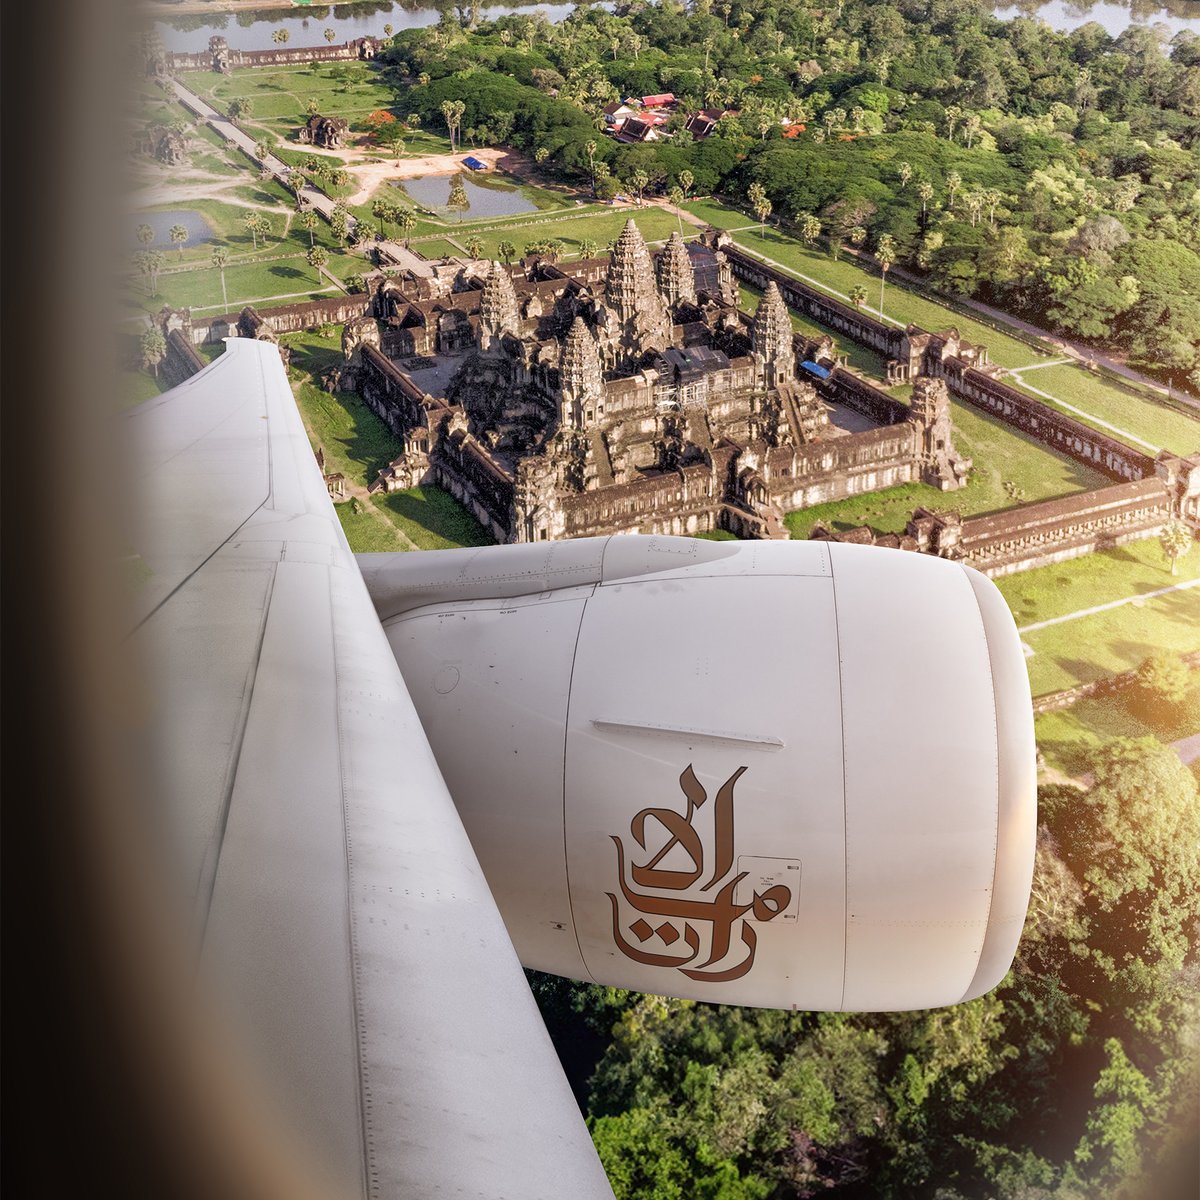 Susadei Cambodia! 🙏 We're returning to Phnom Penh from 1 May, with daily flights via Singapore.